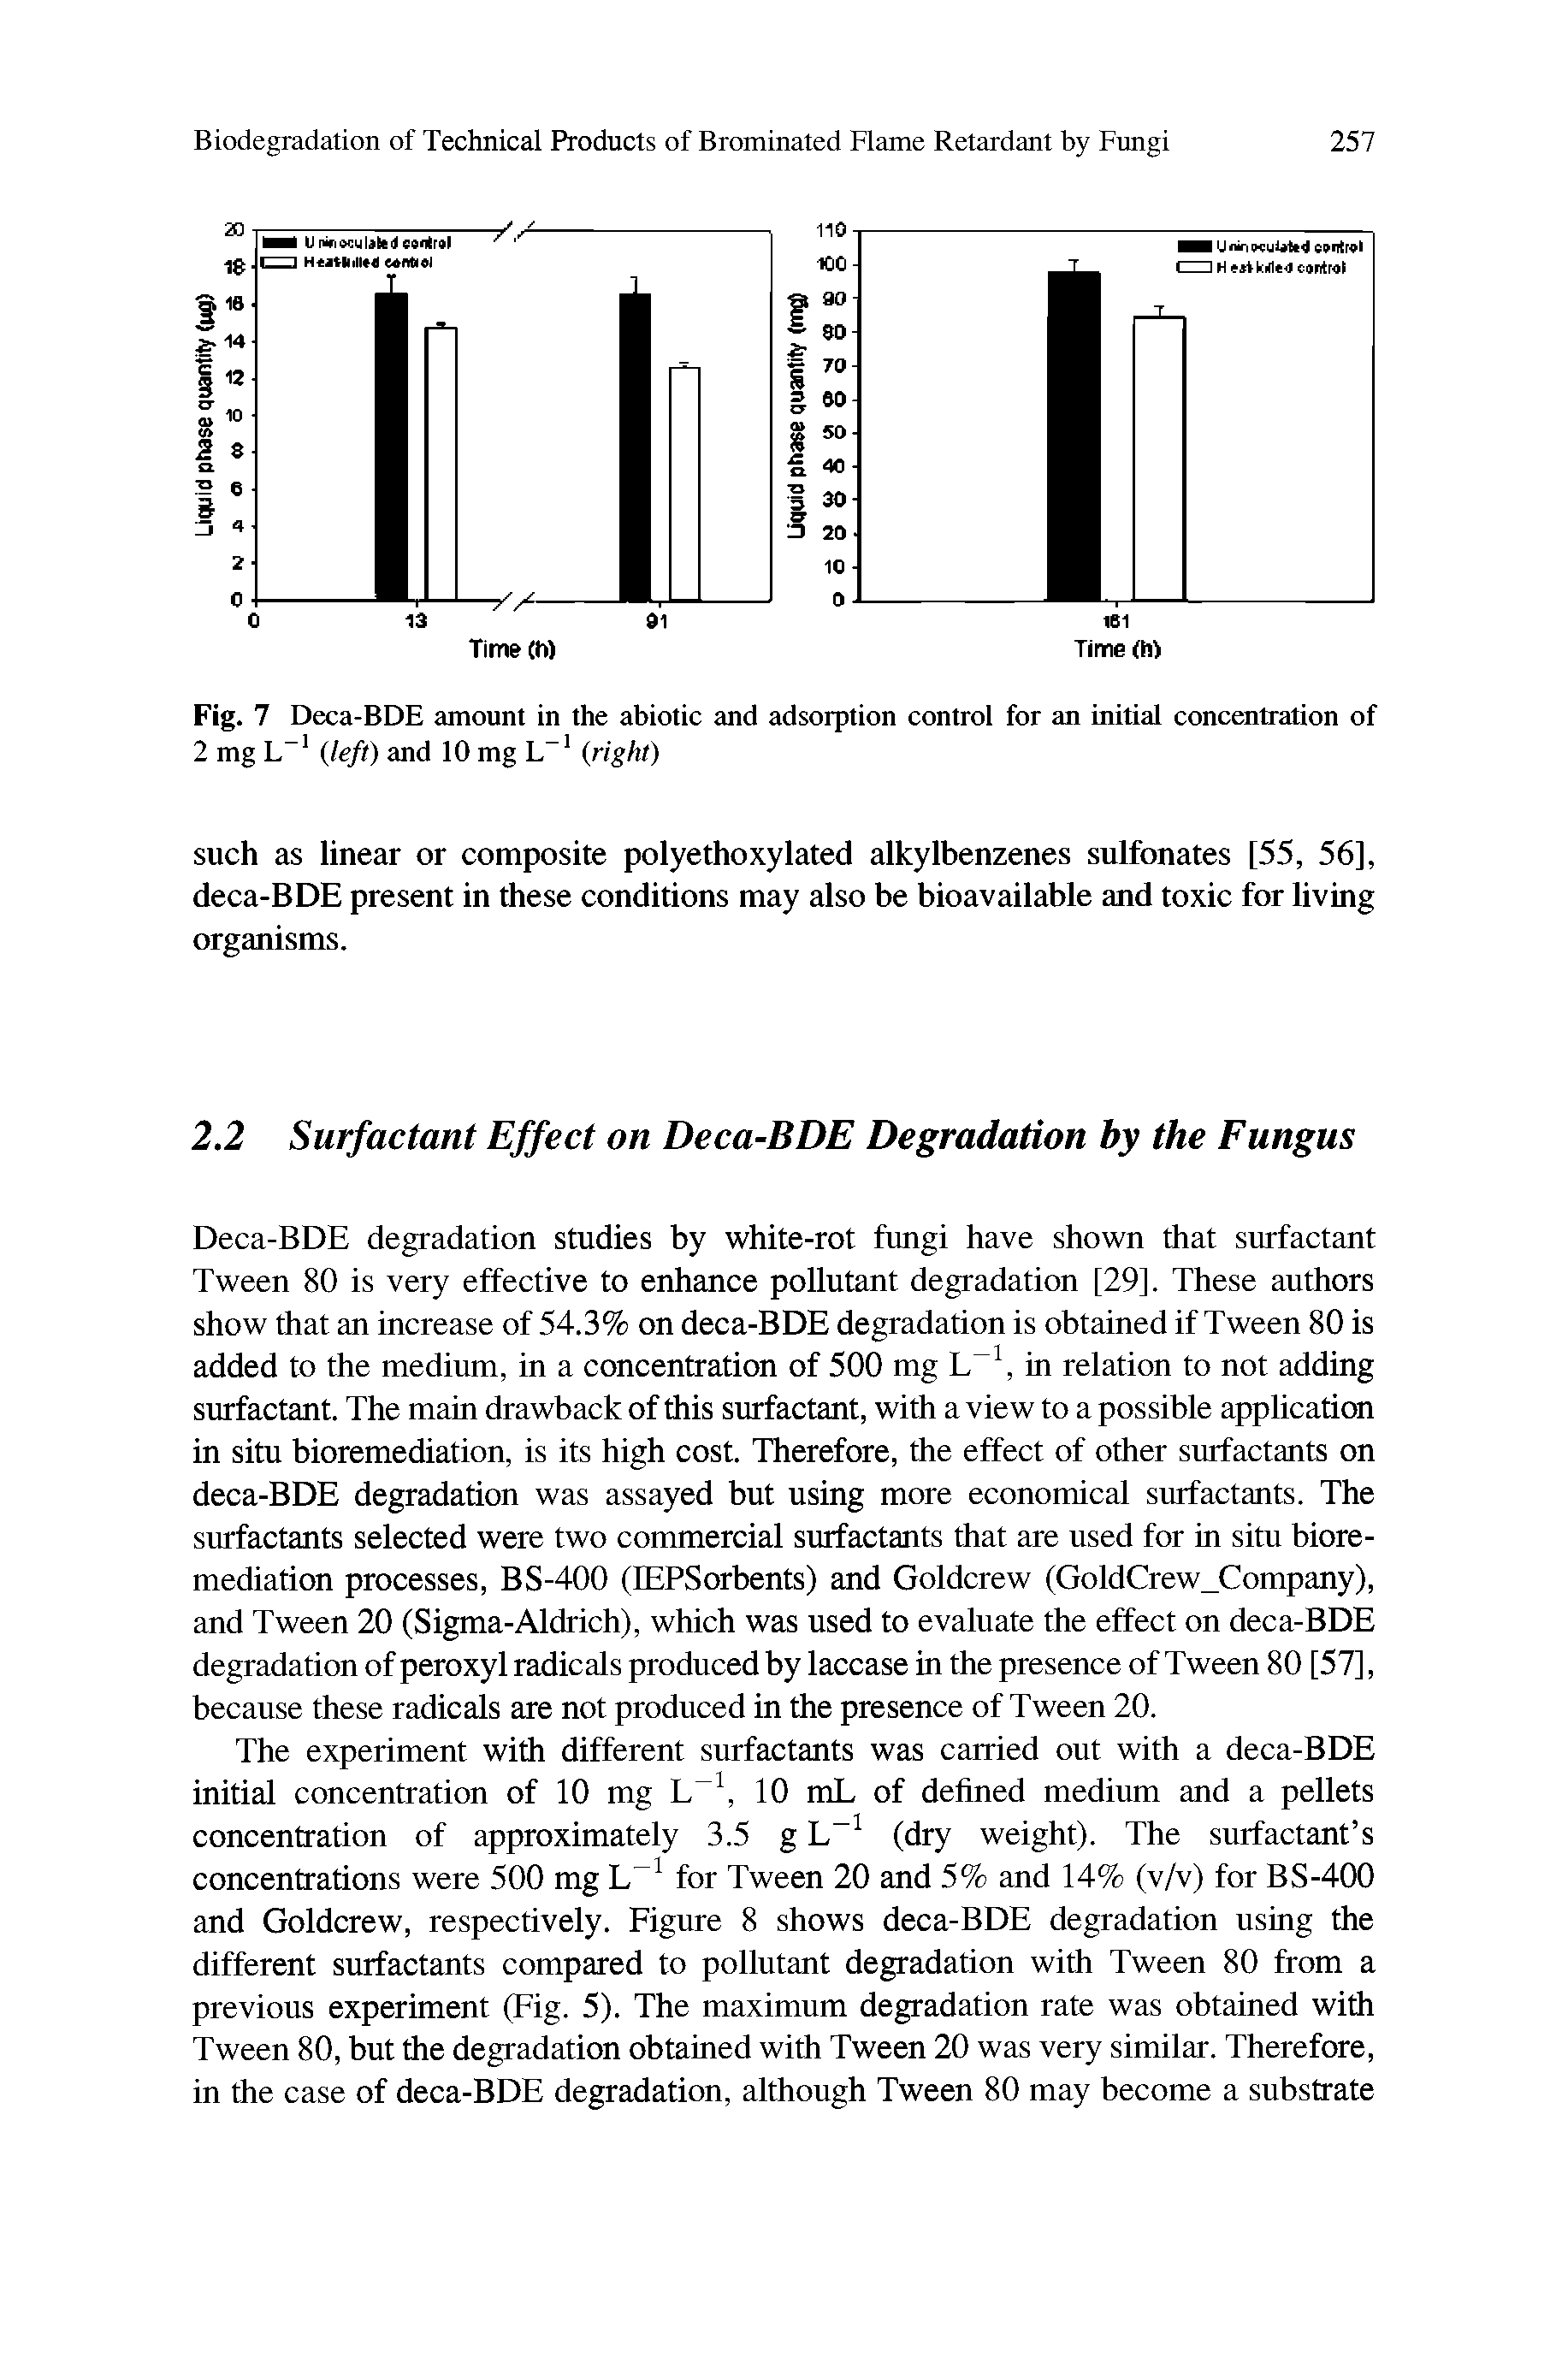 Fig. 7 Deca-BDE amount in the abiotic and adsorption control for an initial concentration of 2 mg L-1 (left) and 10 mg L-1 (right)...